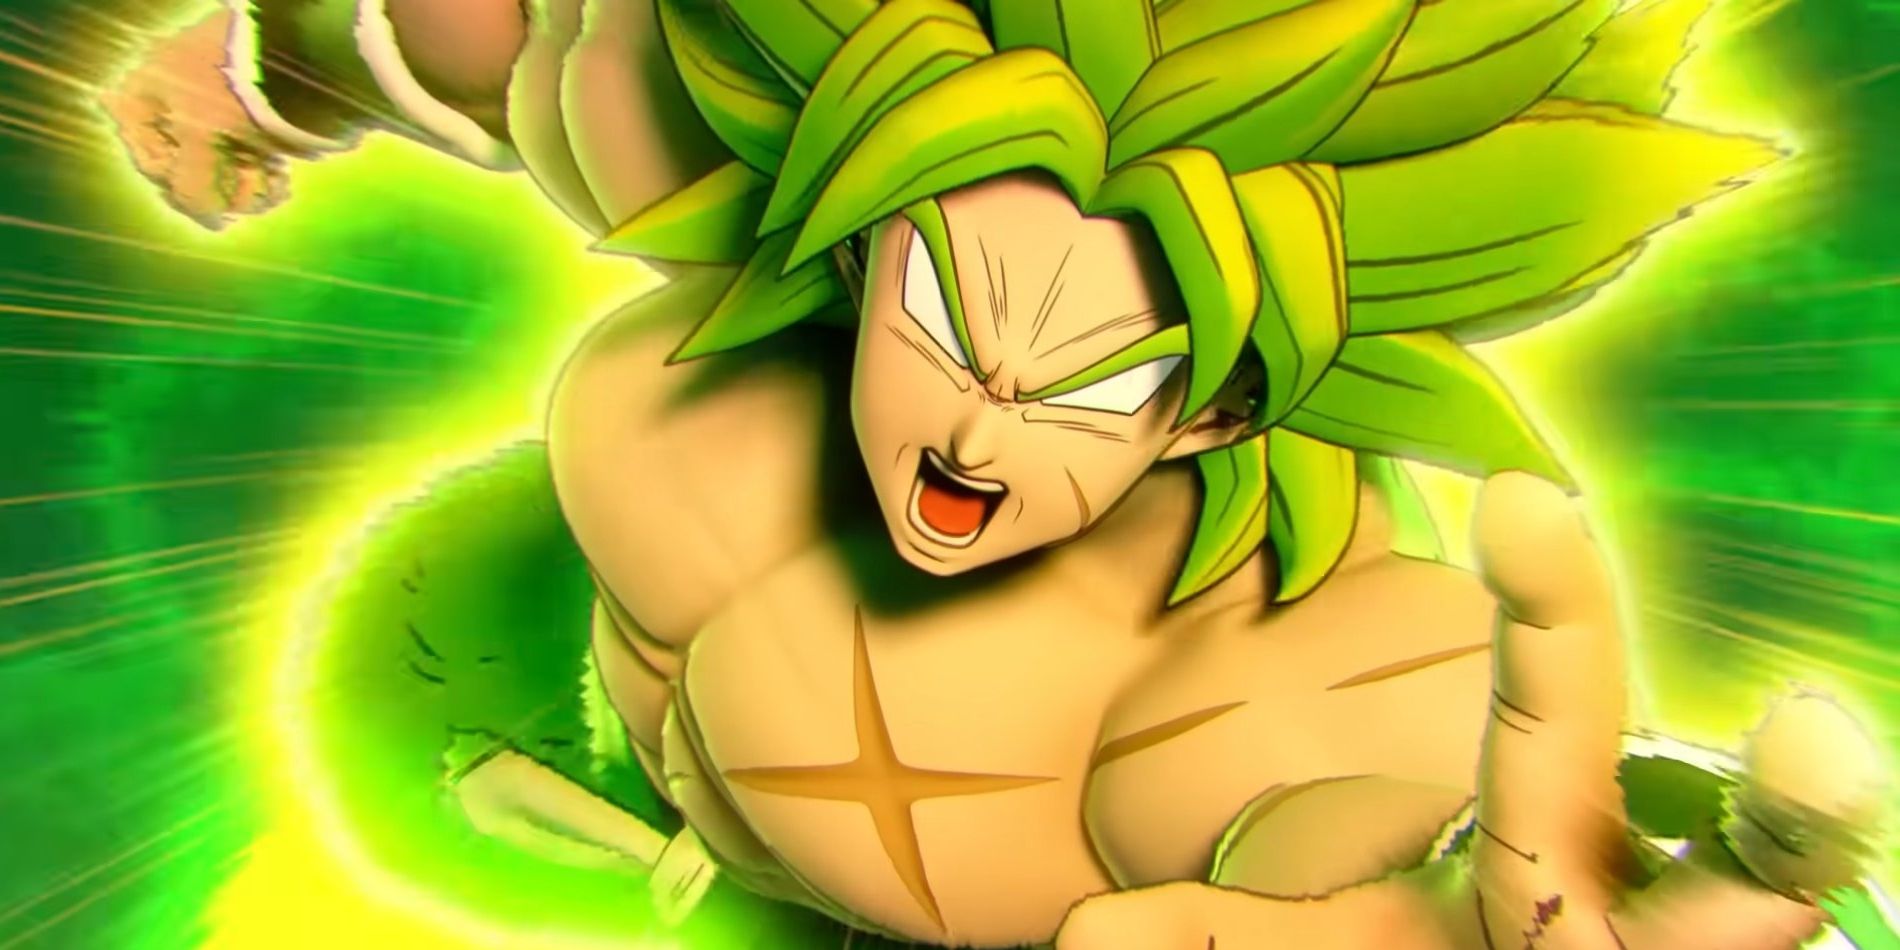 Broly Joins Dragon Ball: The Breakers Game as Raider in Season 4